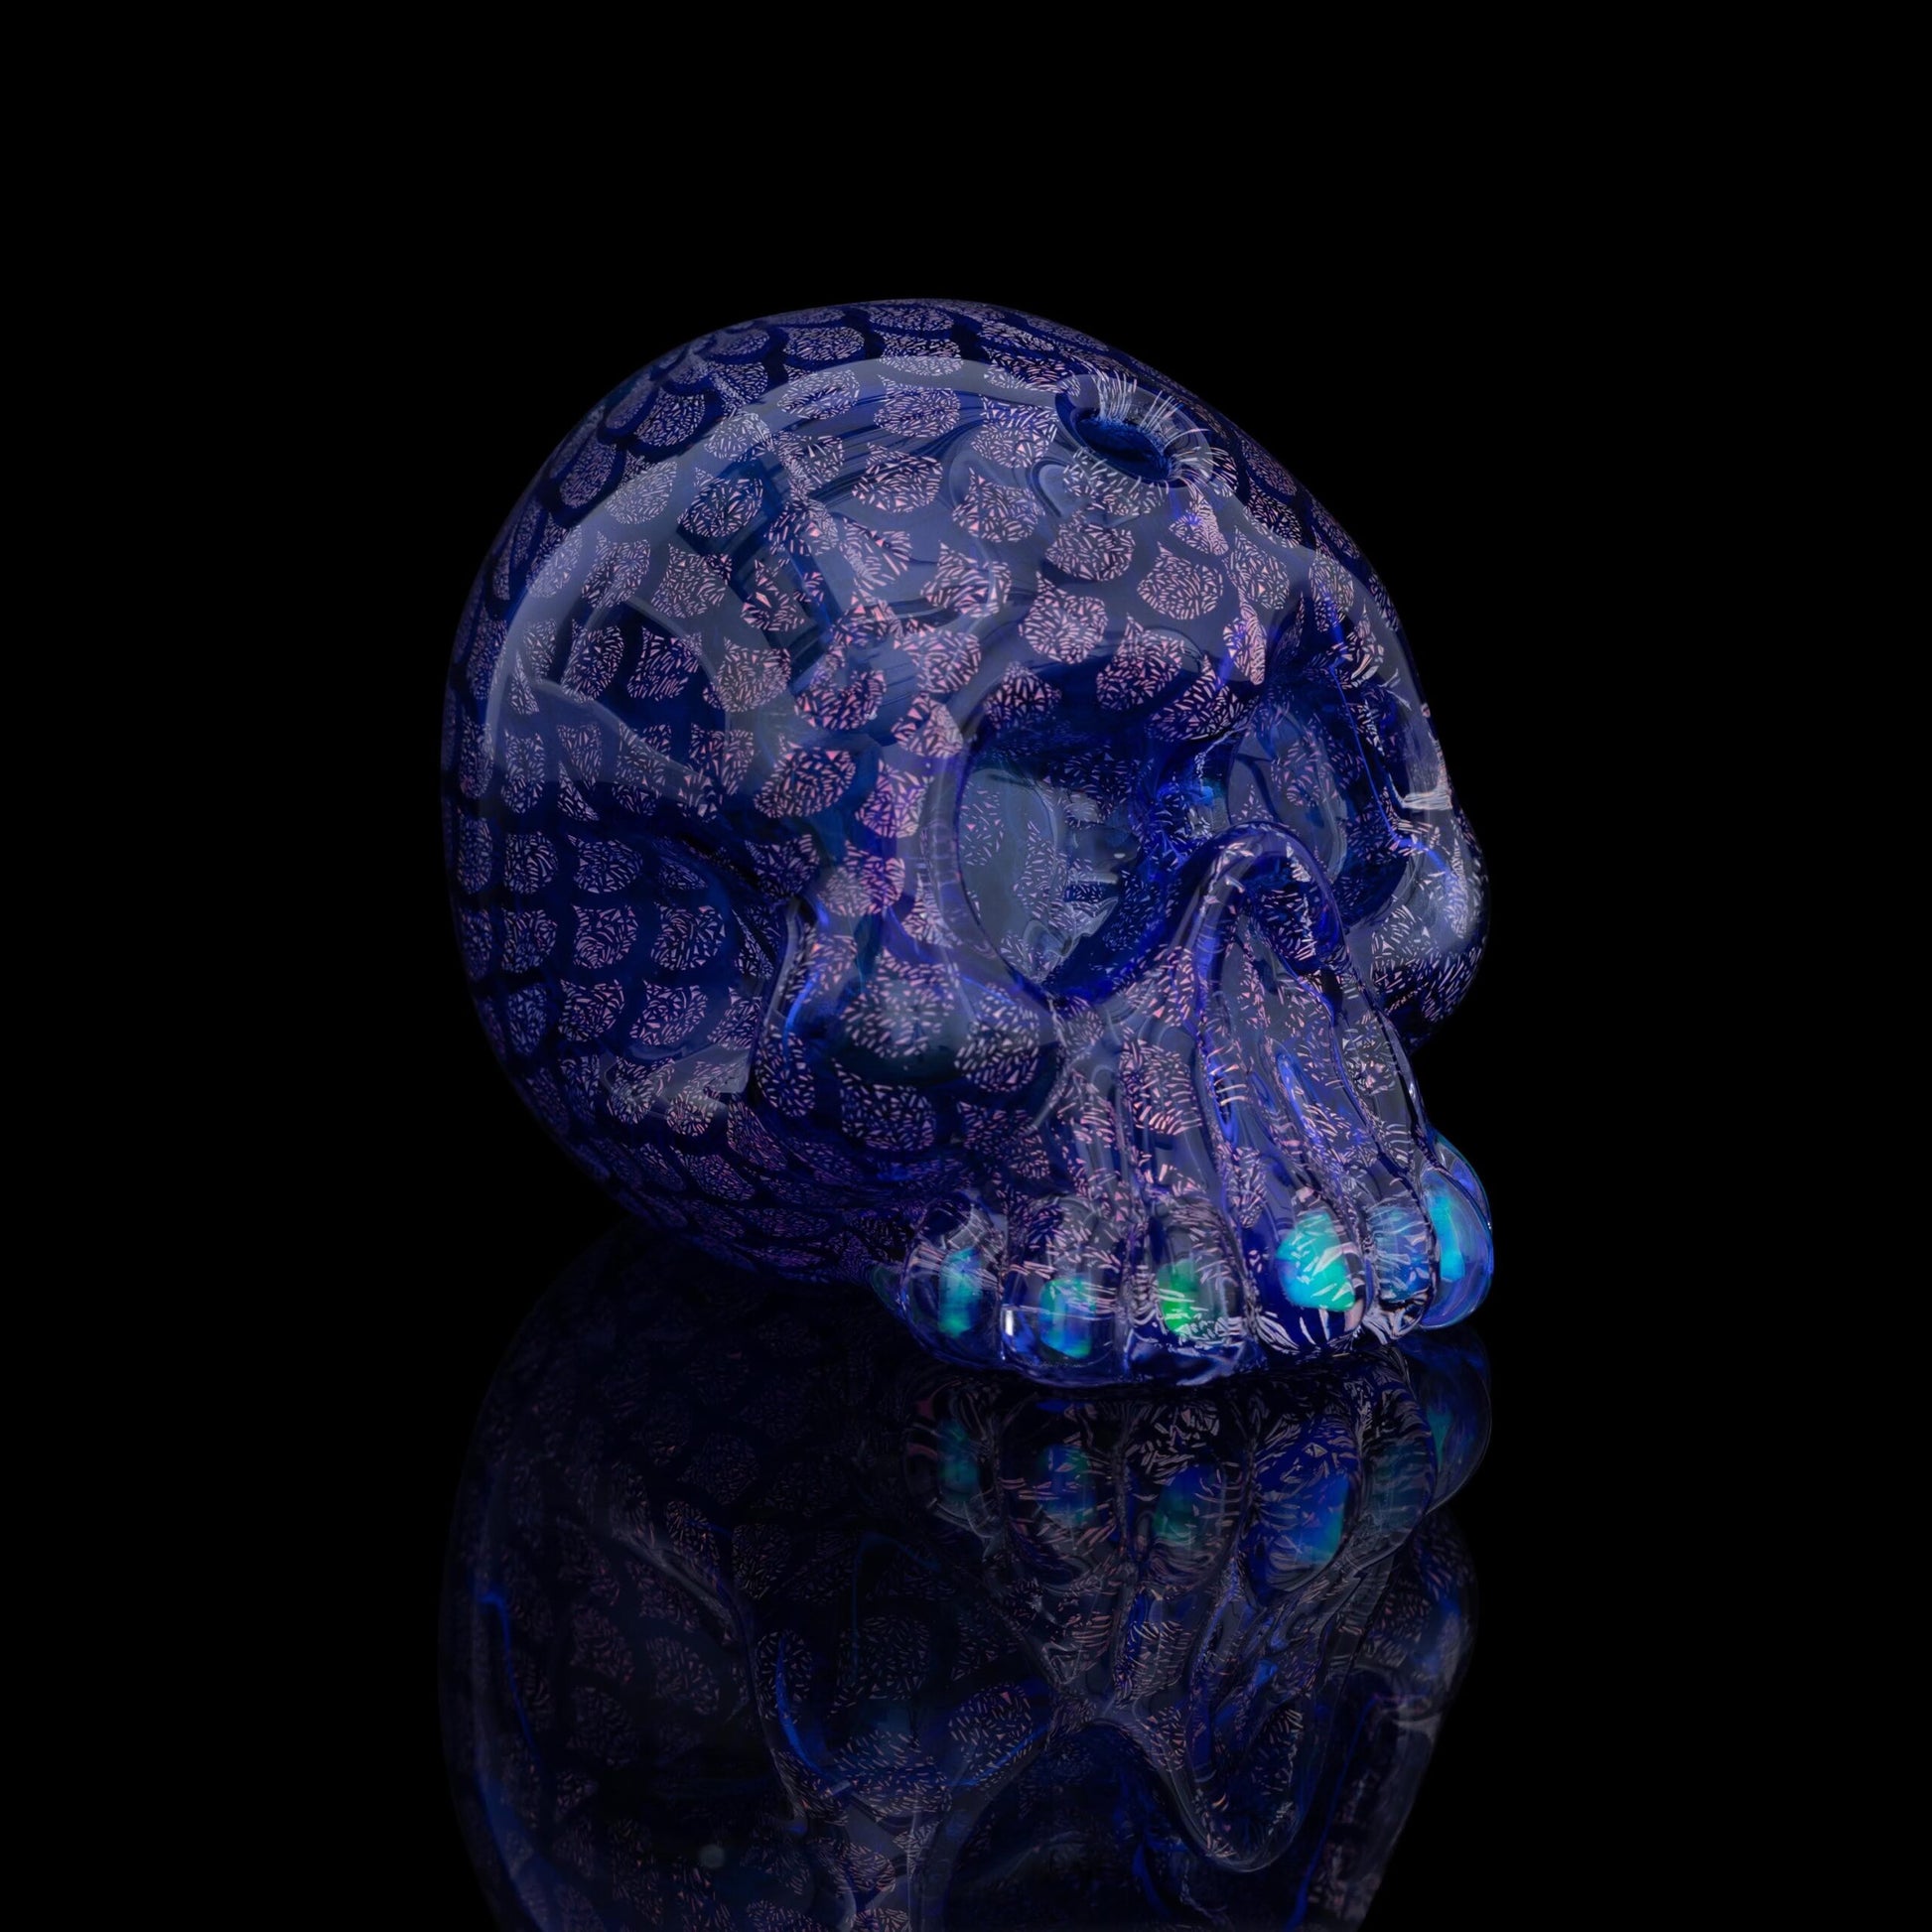 meticulously crafted art piece - Dichro Design Small Skull by Carsten Carlile (2023)